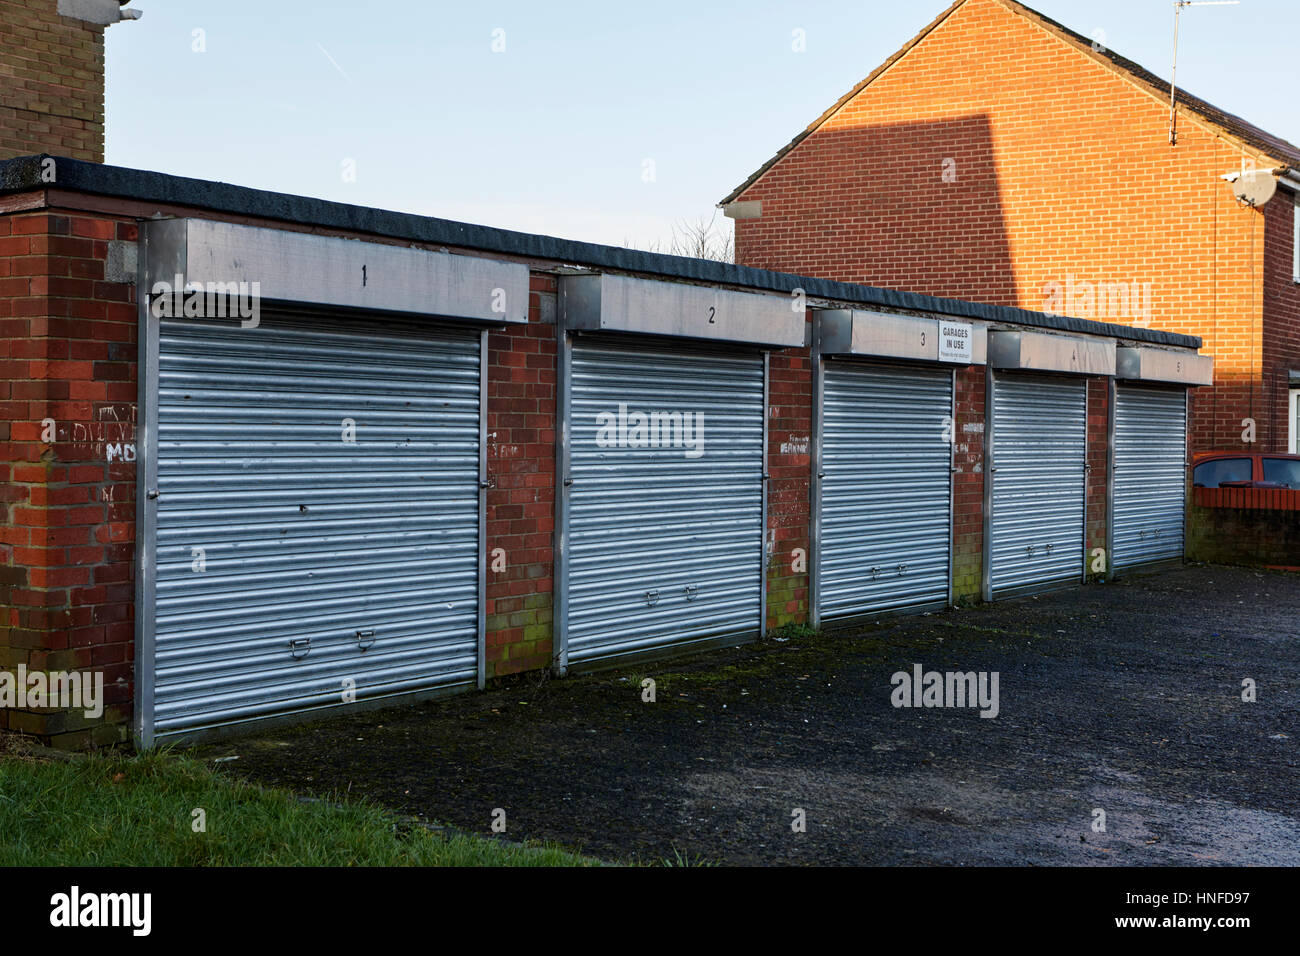 row of small garages on a housing estate in kirkby liverpool uk Stock Photo